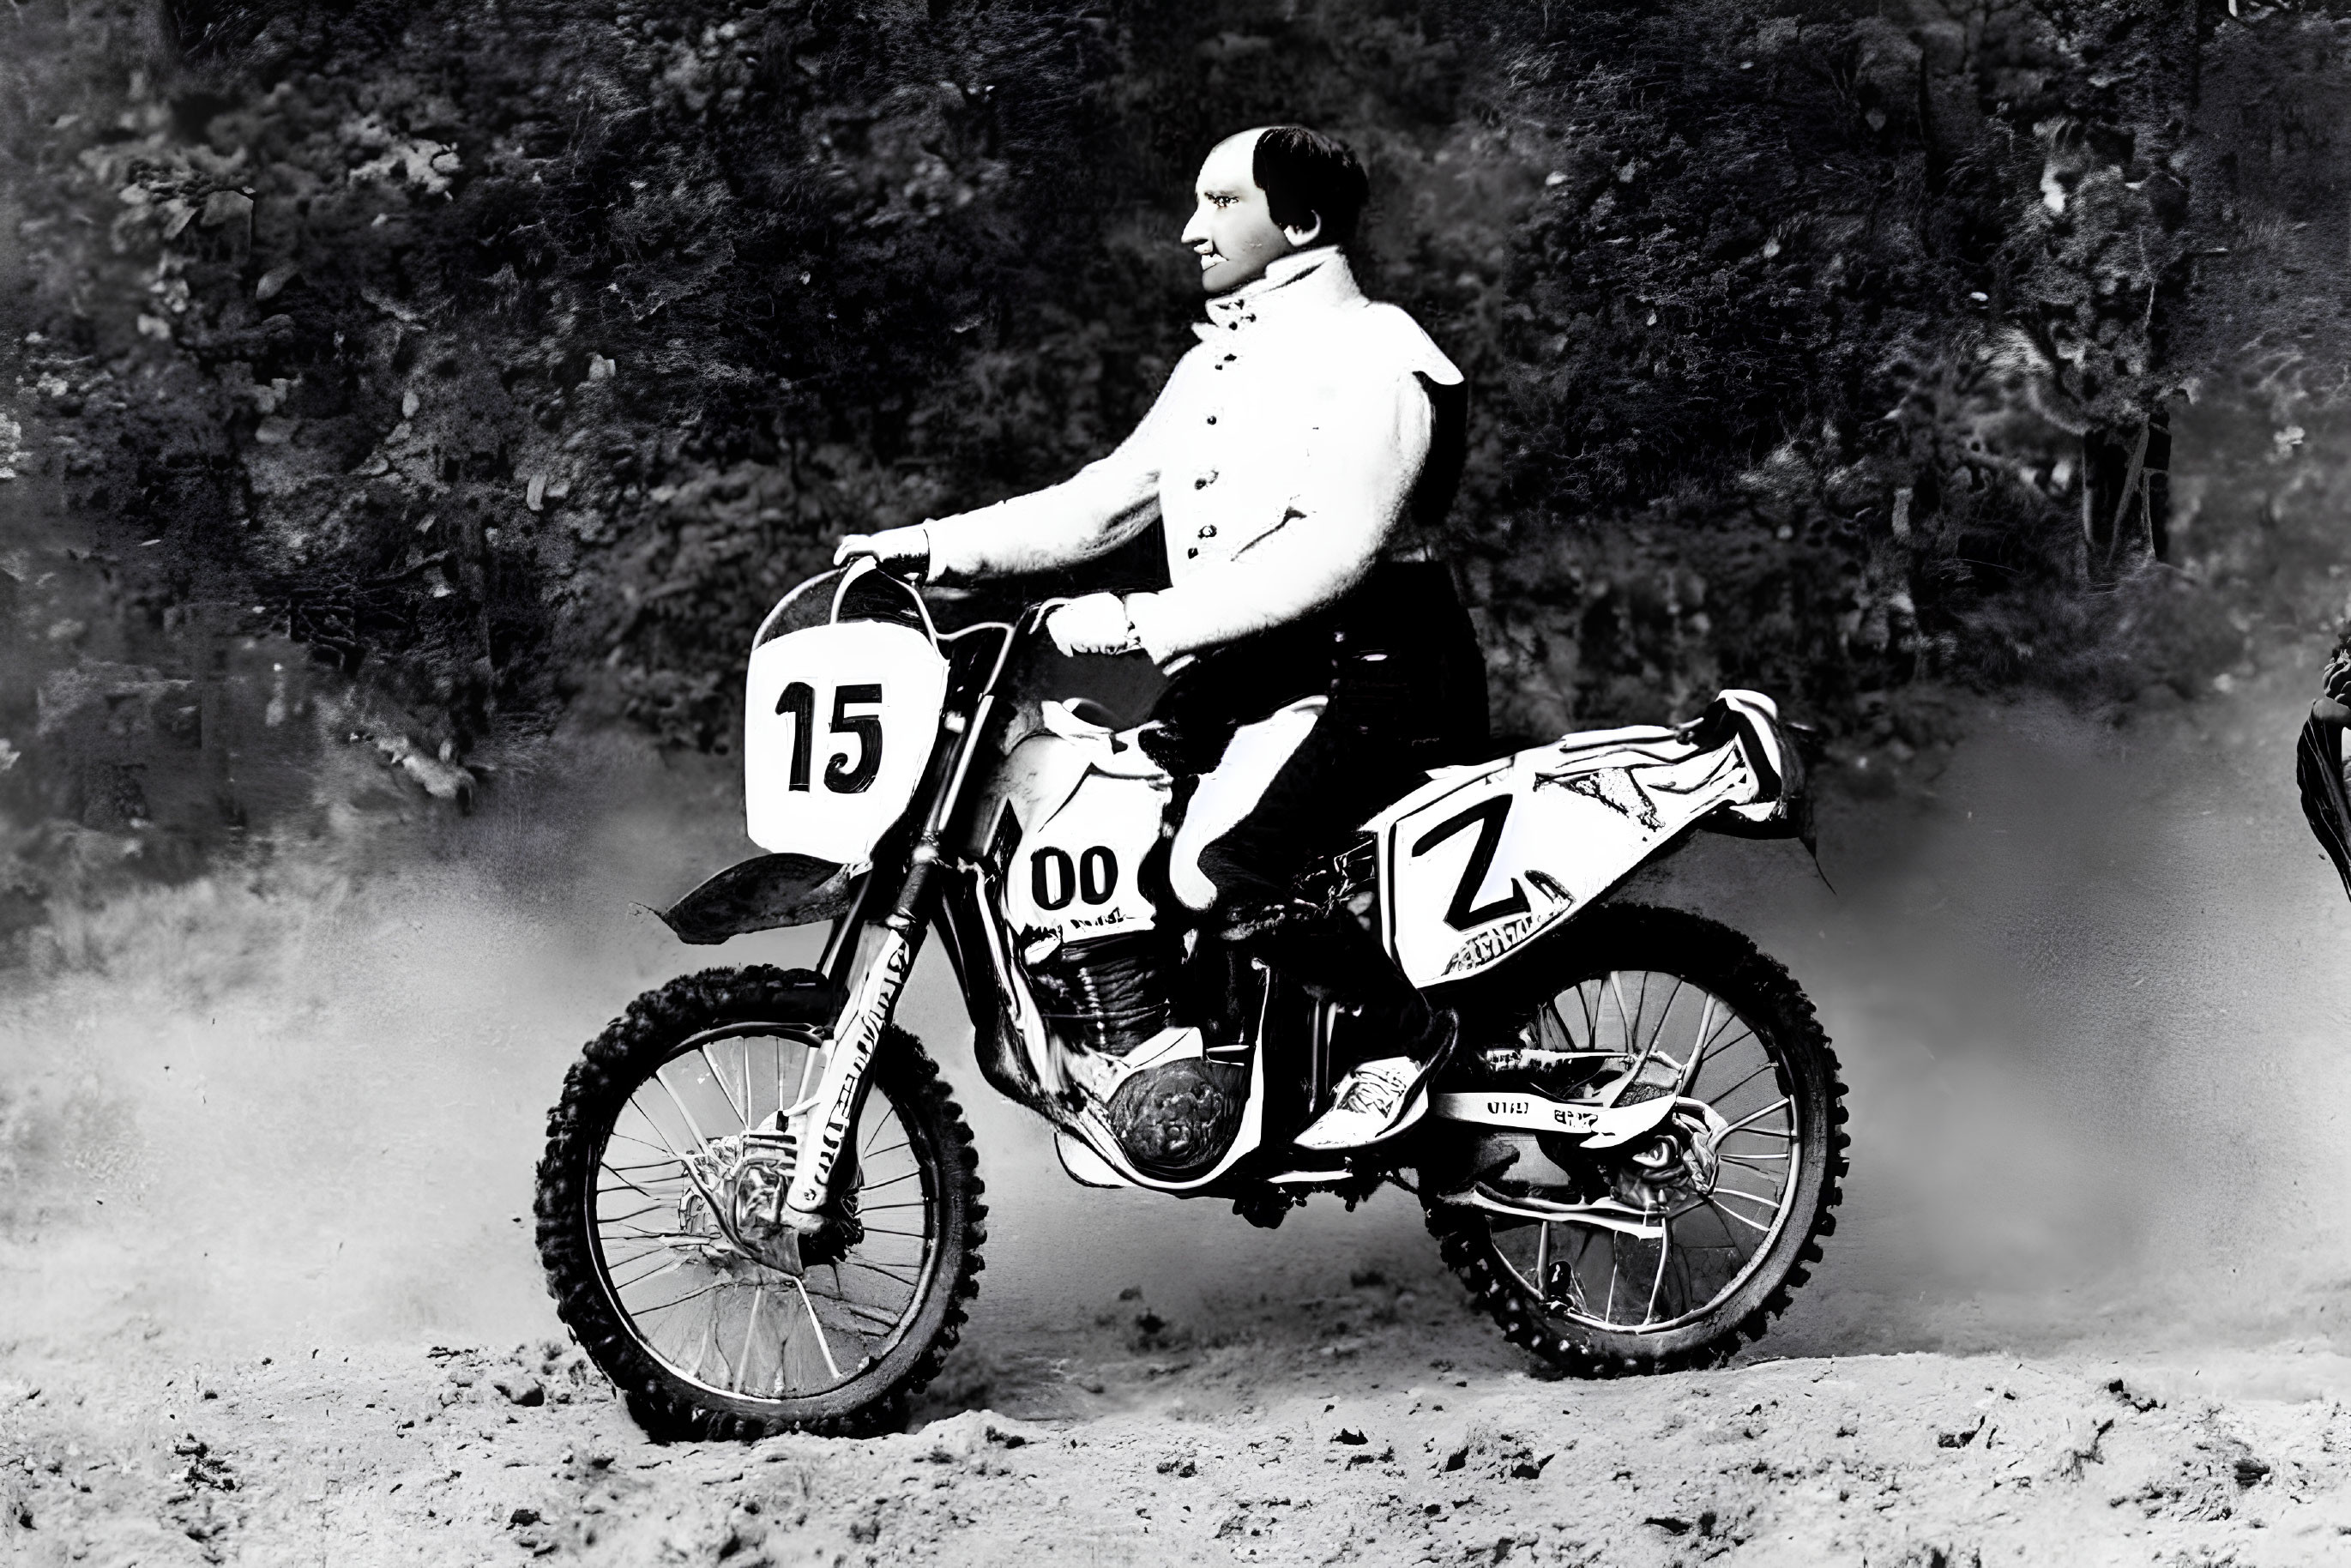 Vintage Attire Person on Modern Motocross Bike with Number 15